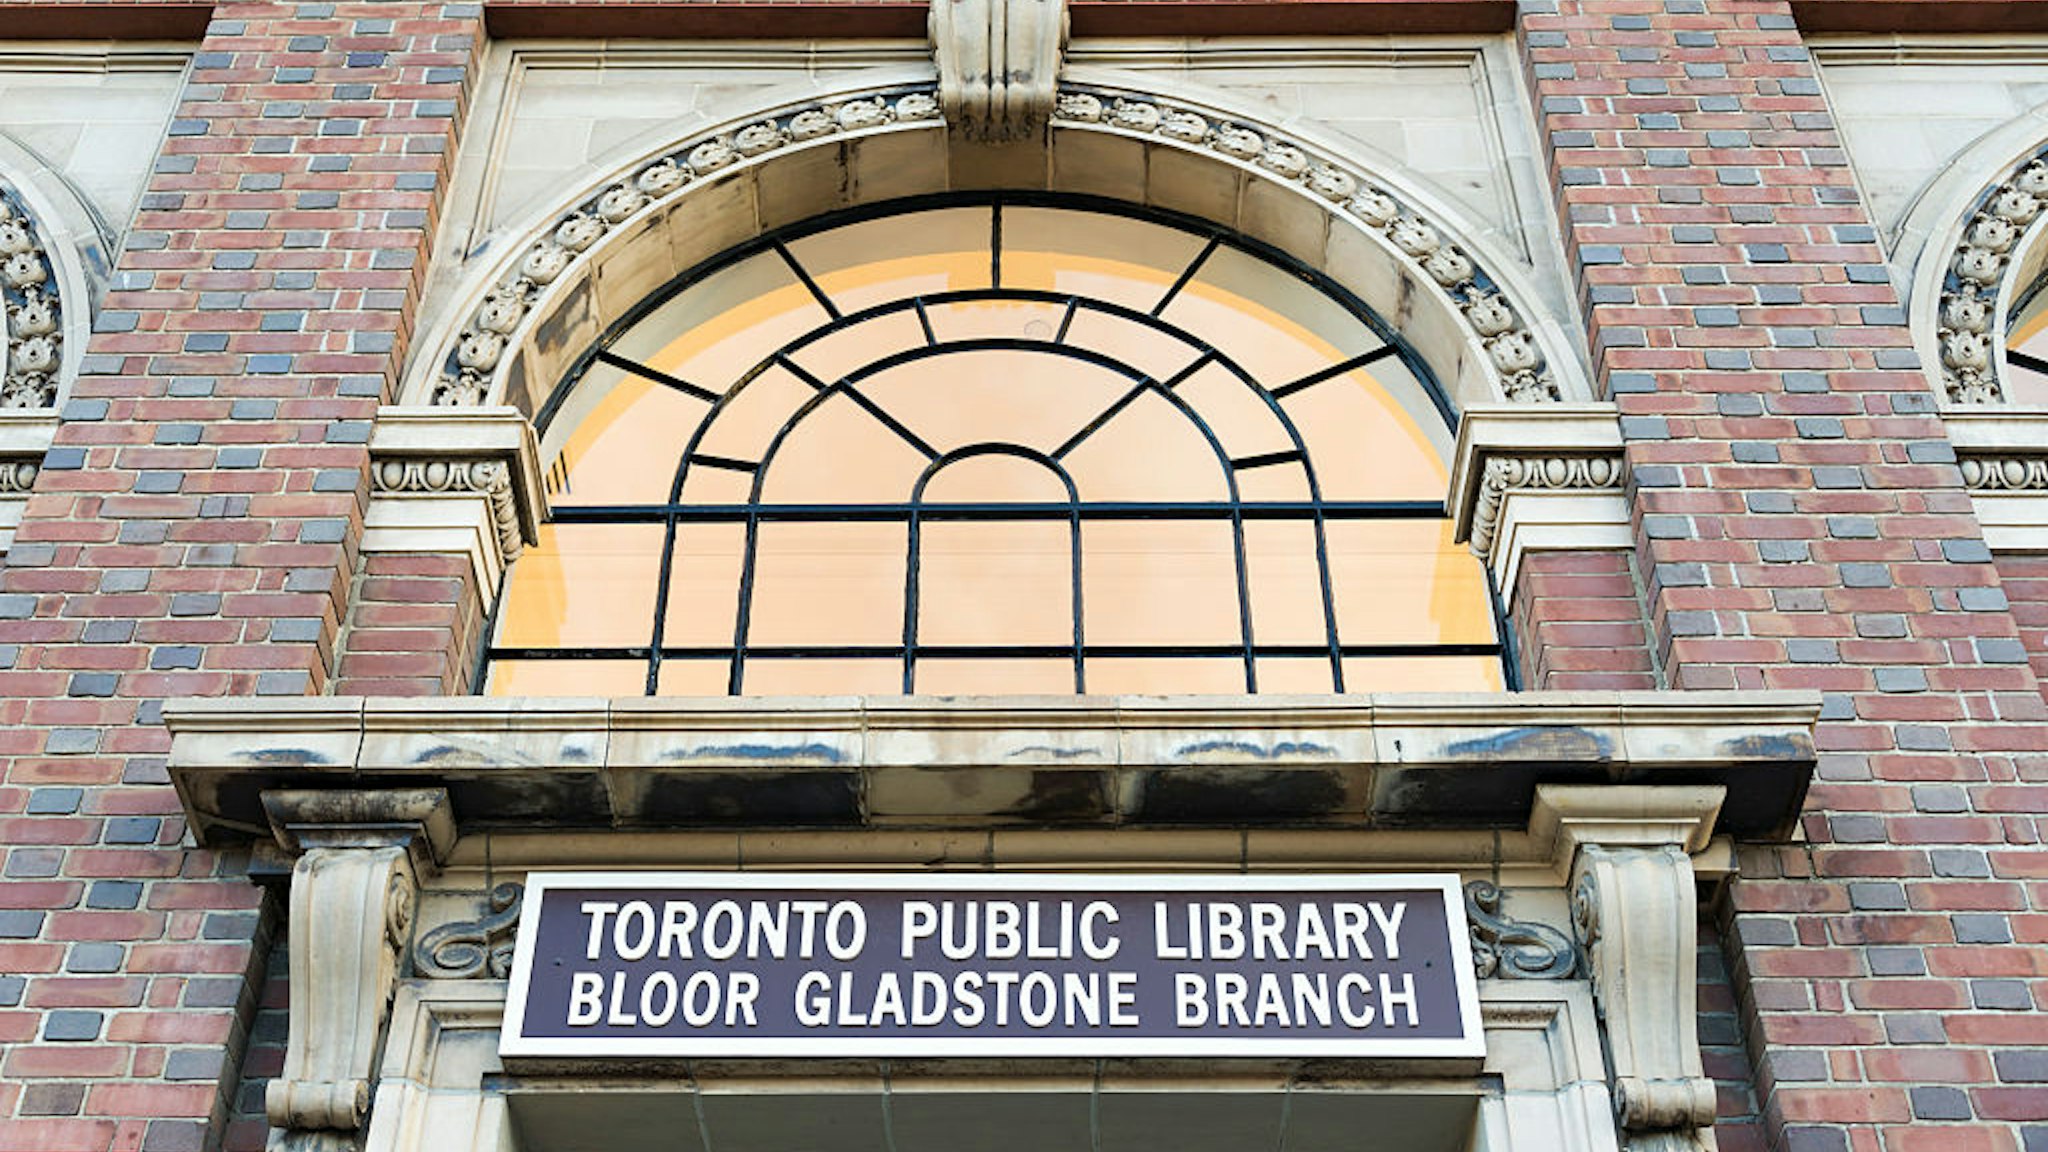 TORONTO, ONTARIO, CANADA - 2015/10/25: Vintage architecture at Toronto Public Library, Bloor Gladstone branch. Toronto Public Library is the largest public library system in Canada, and the world's busiest urban library system.